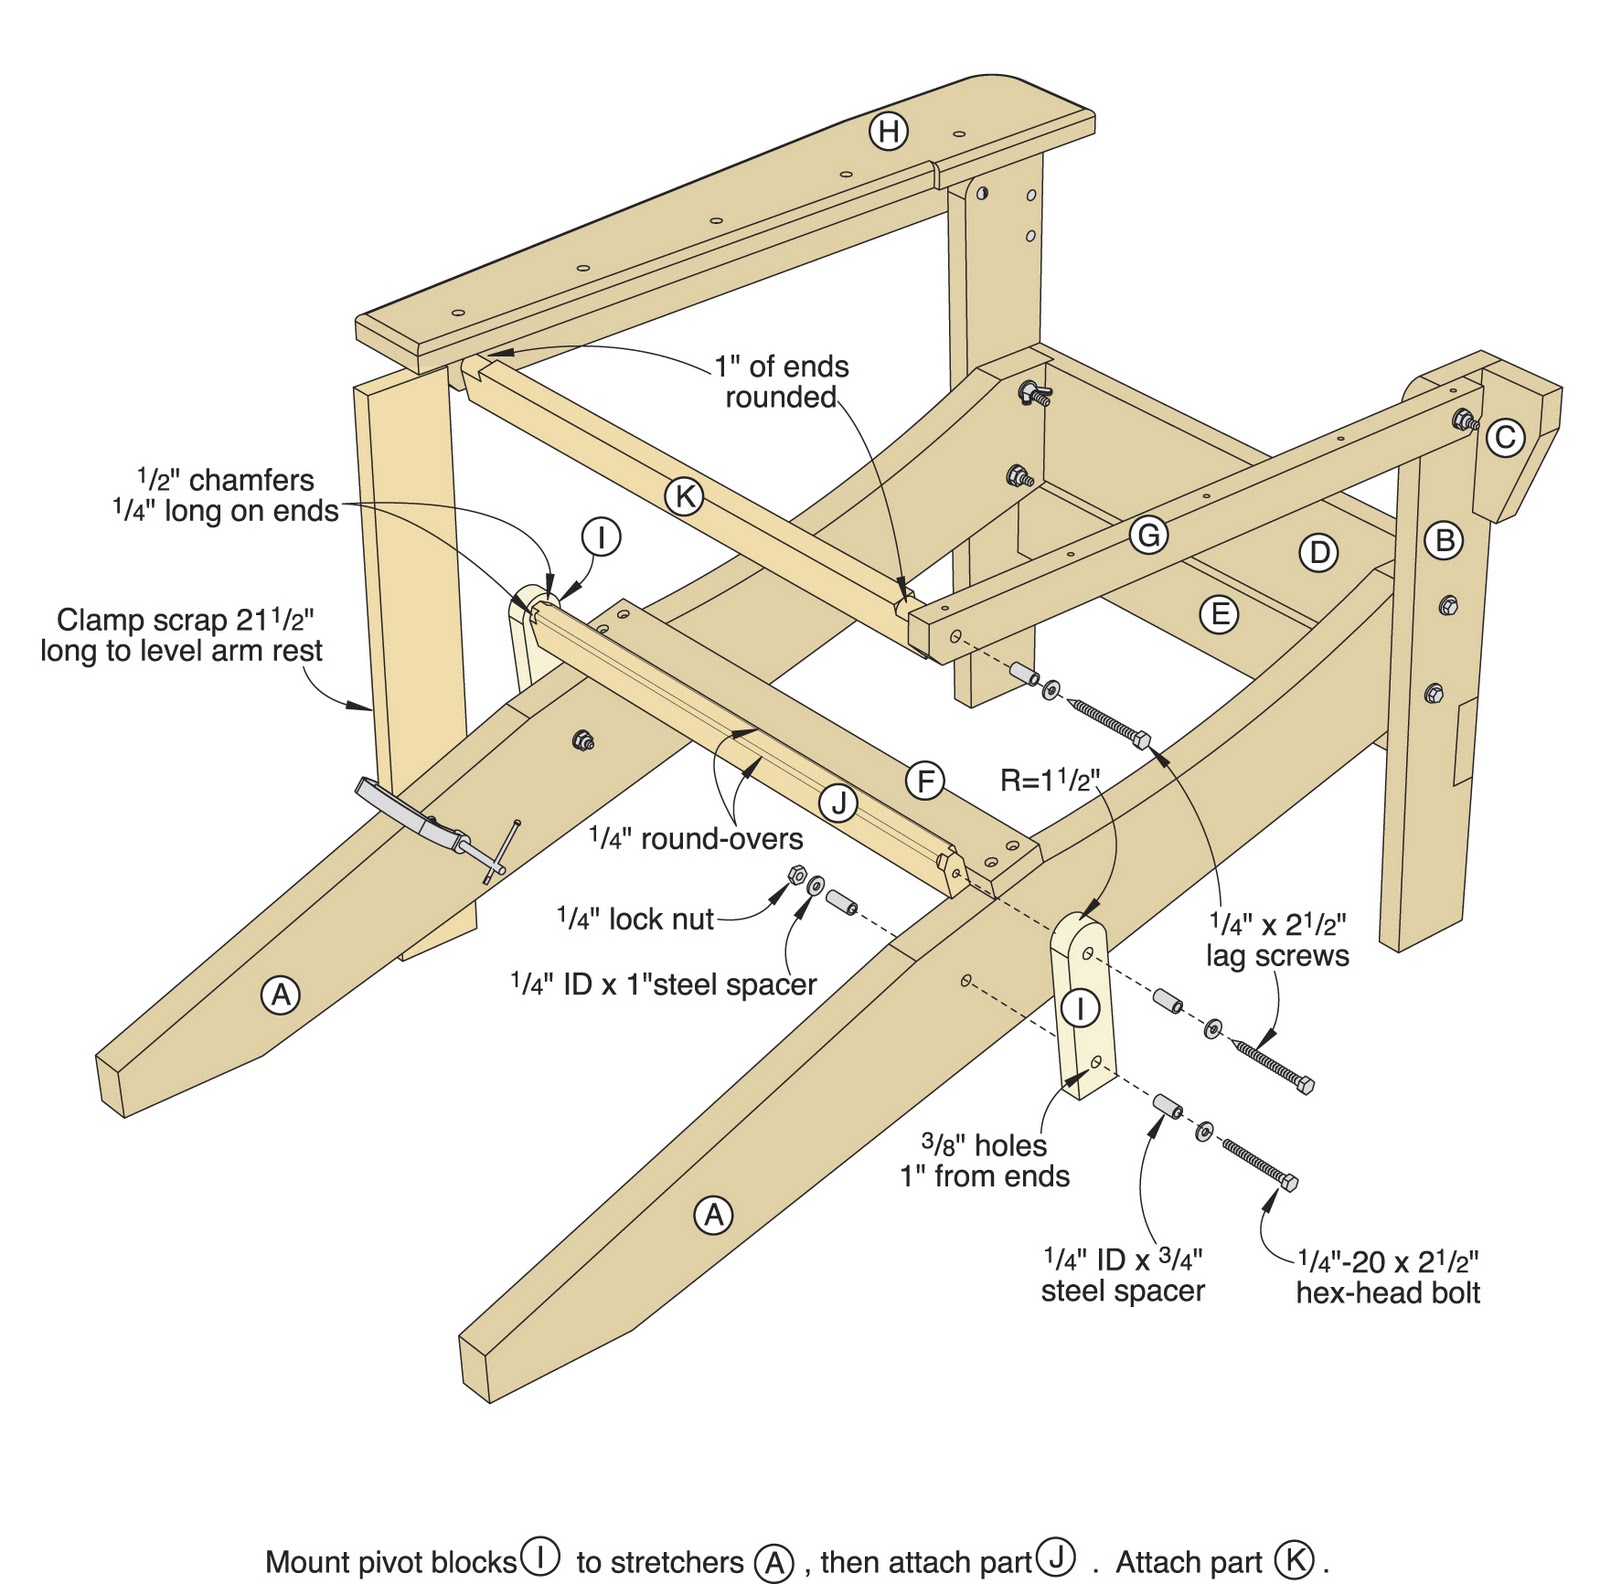 Wood Working Plans , Shed Plans and more: Folding Adirondack Chair Project